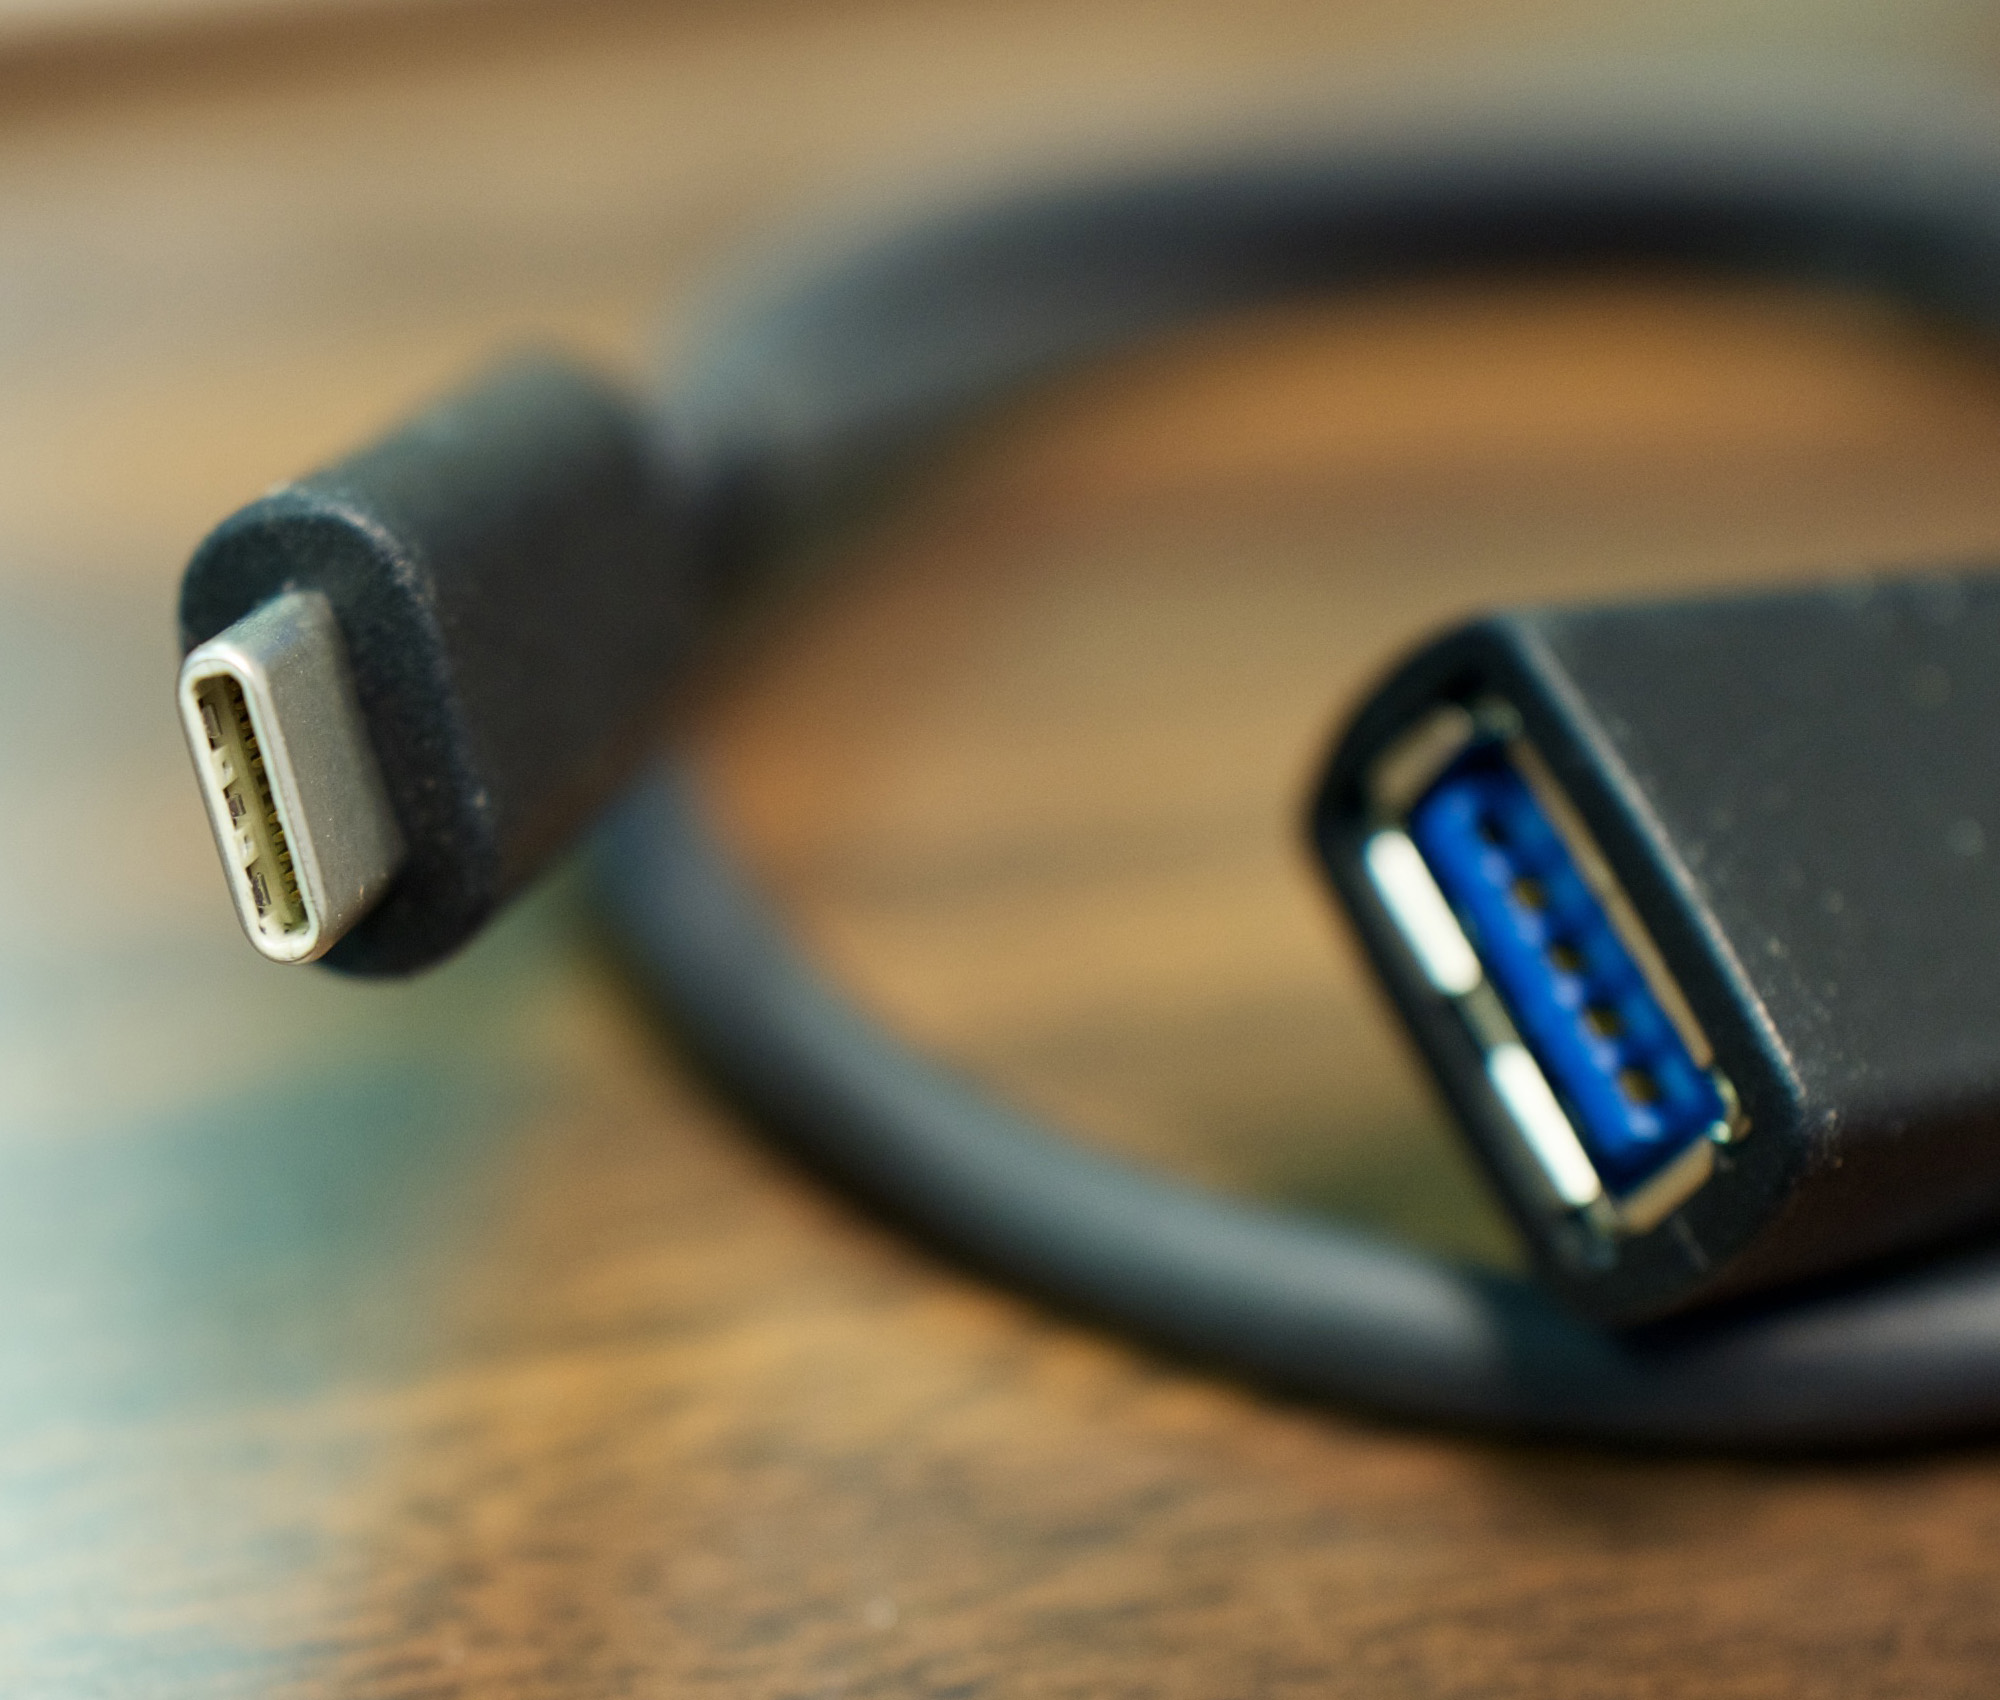 Demystifying USB Standards: A Guide for Consumers